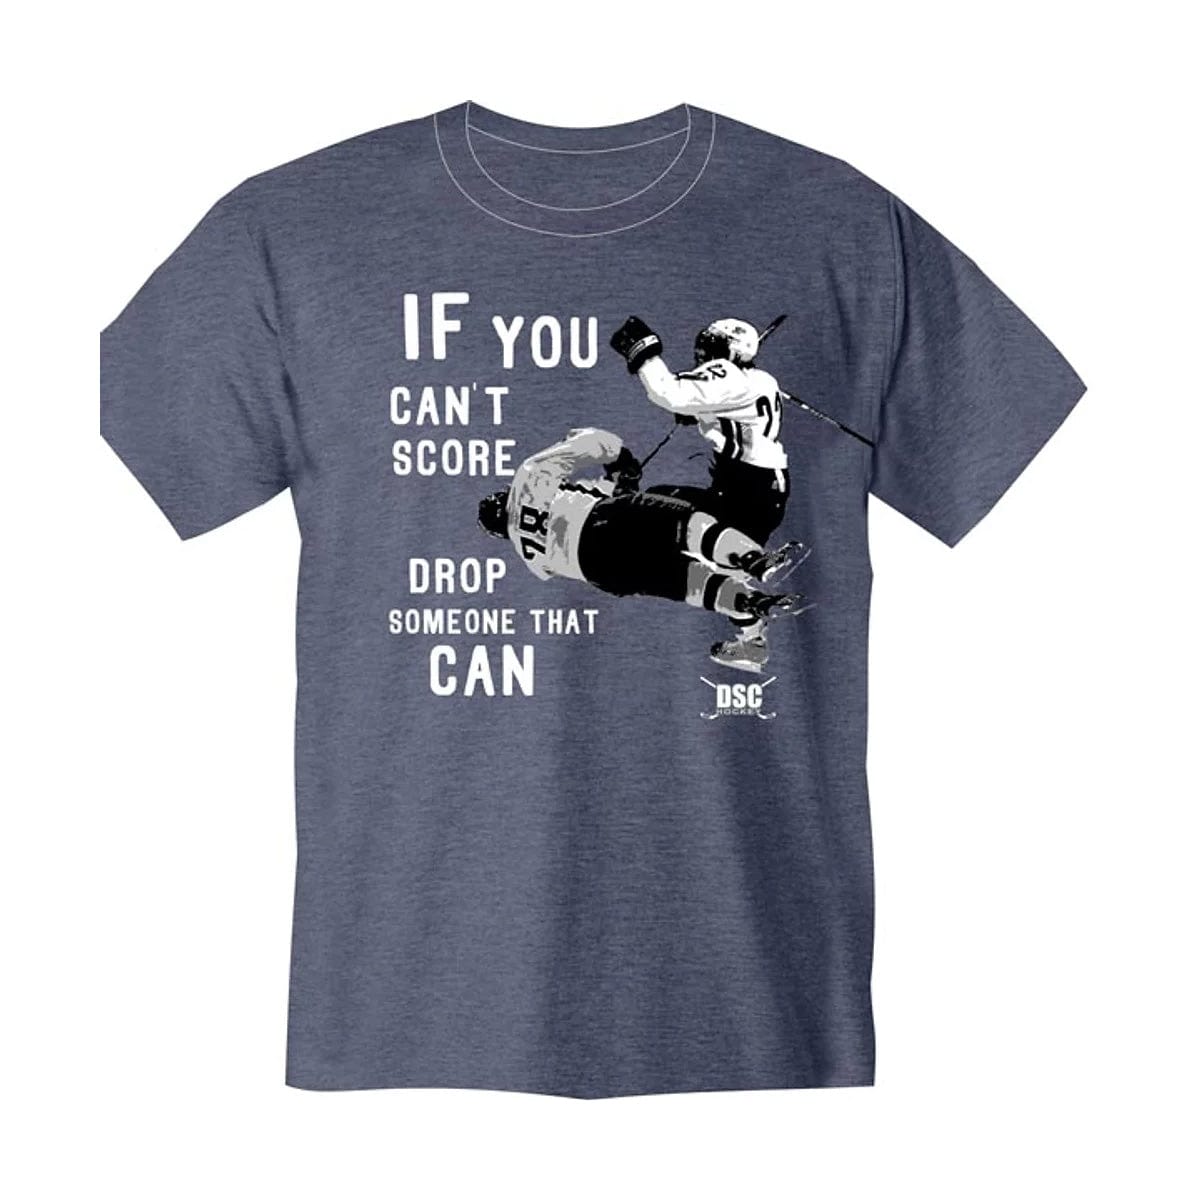 DSC Hockey Can't Score Mens Shirt - The Hockey Shop Source For Sports